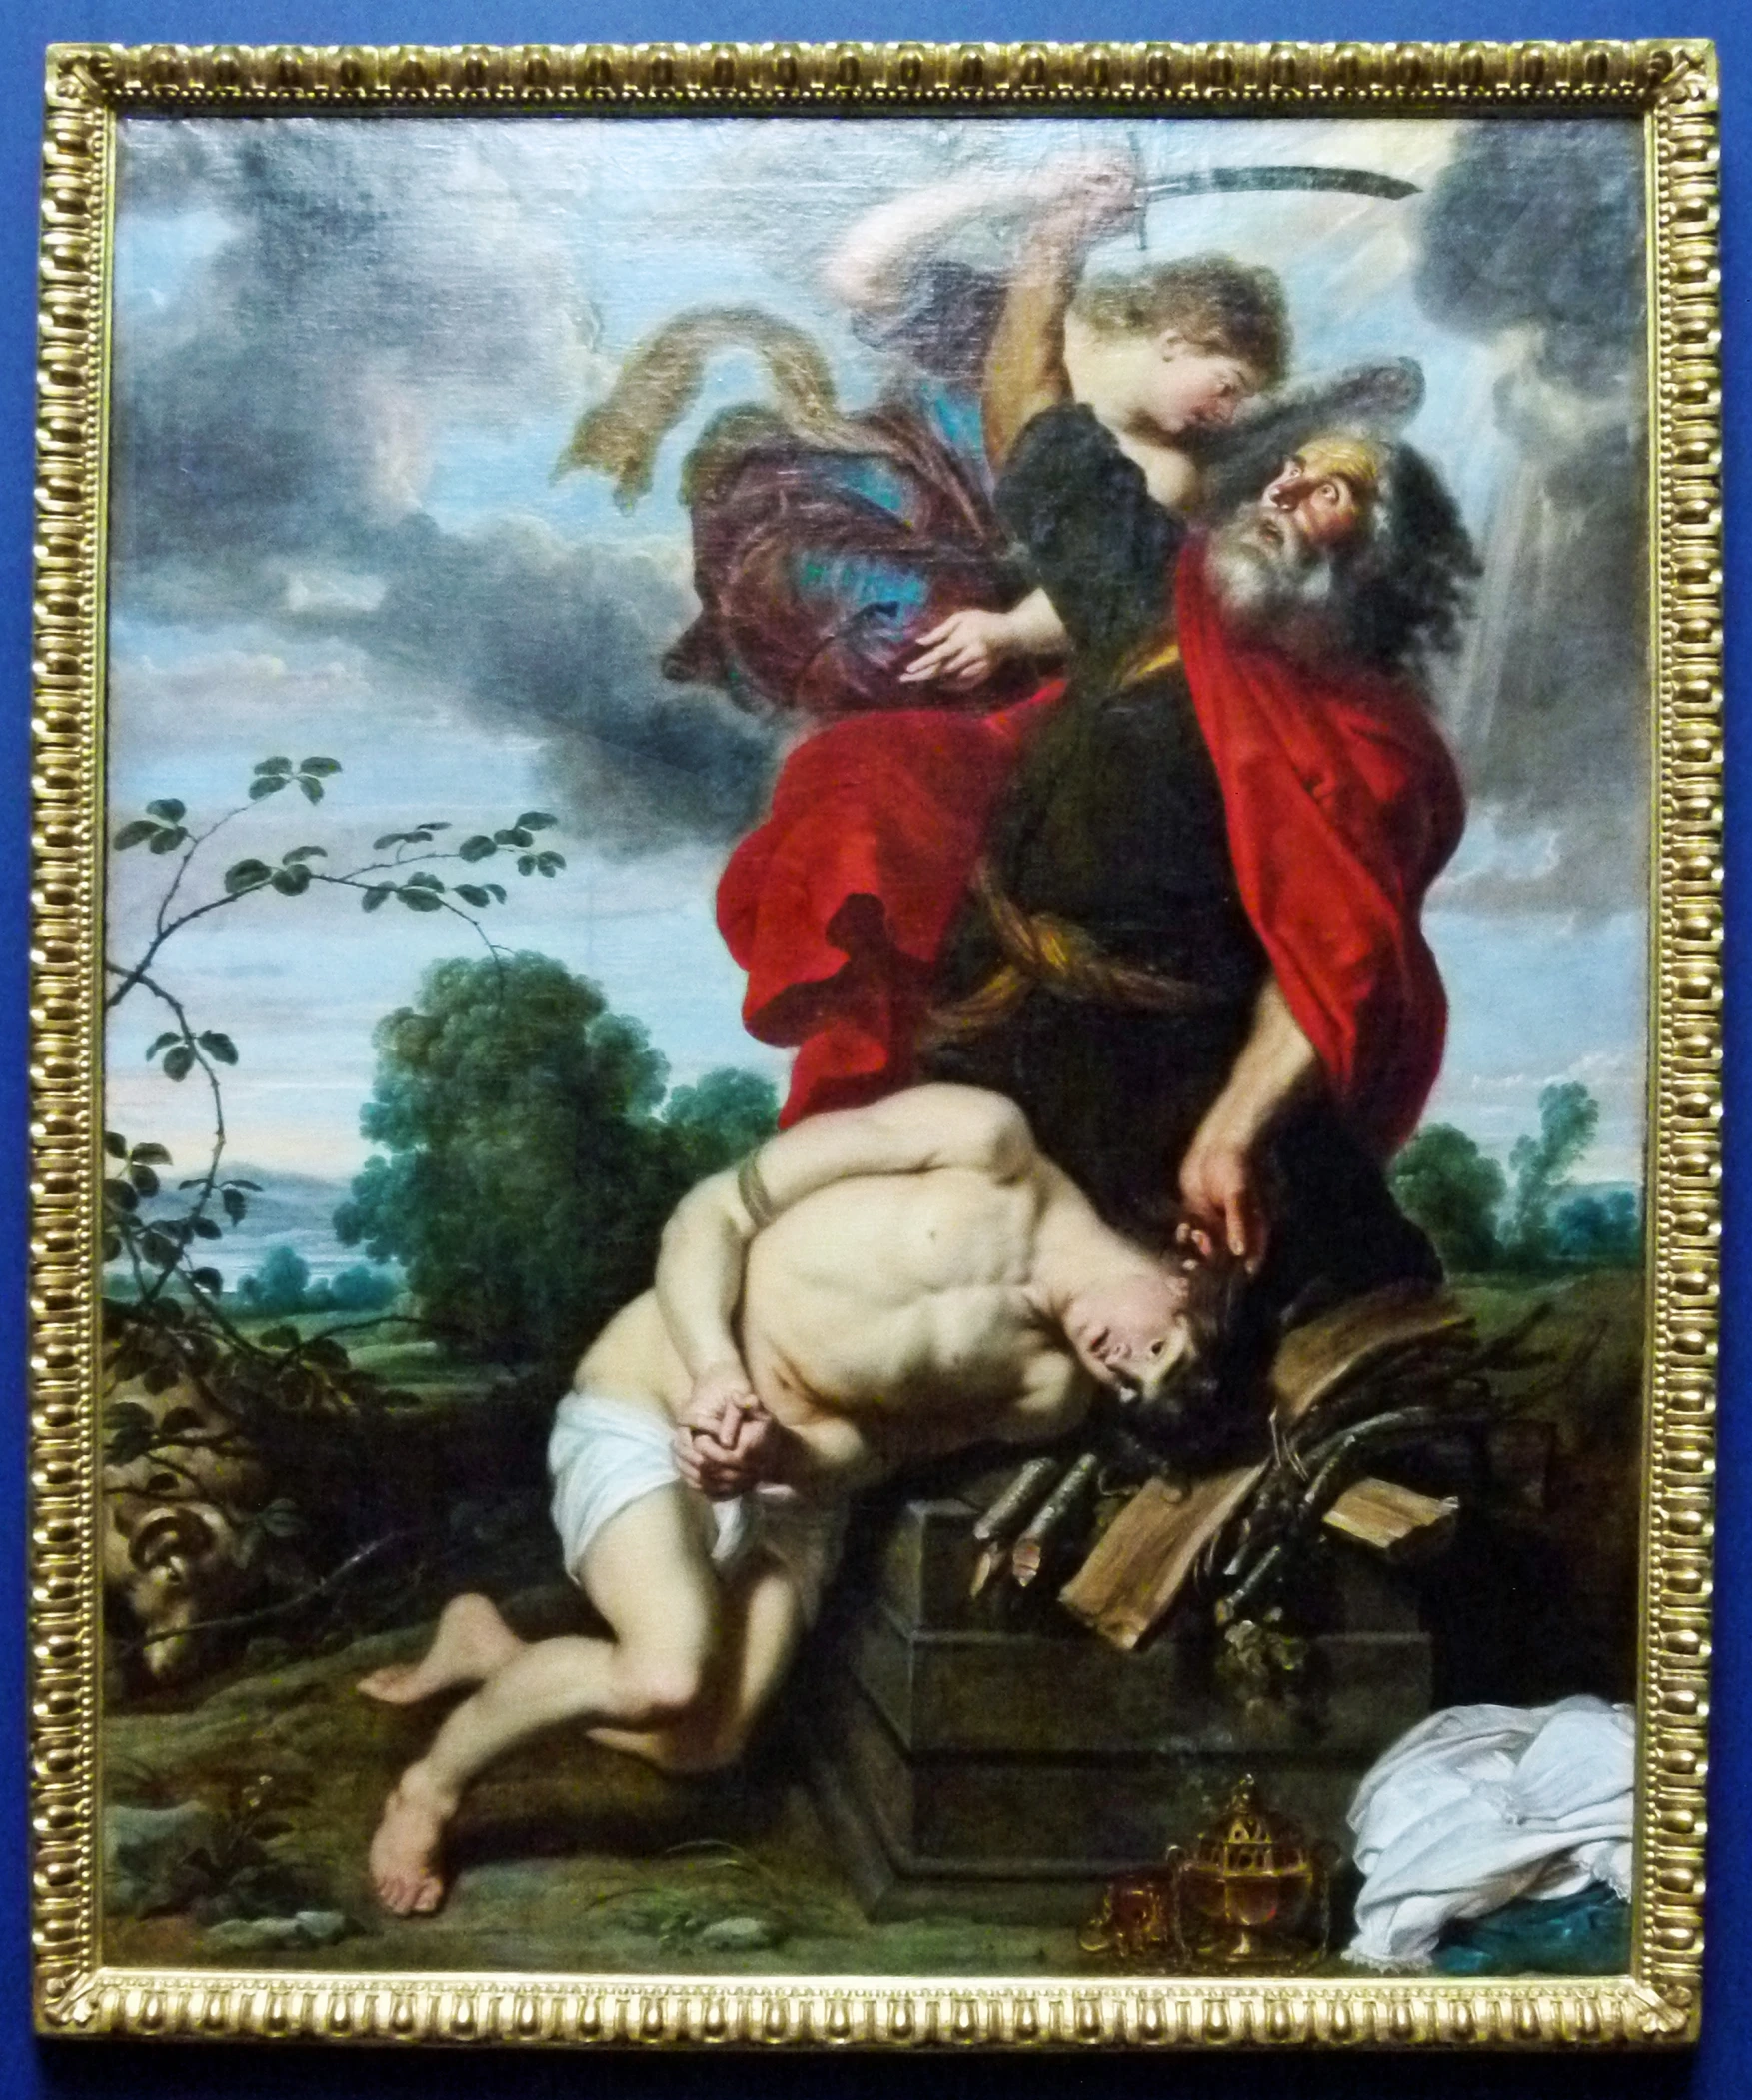 a painting of a man being lifted by a woman